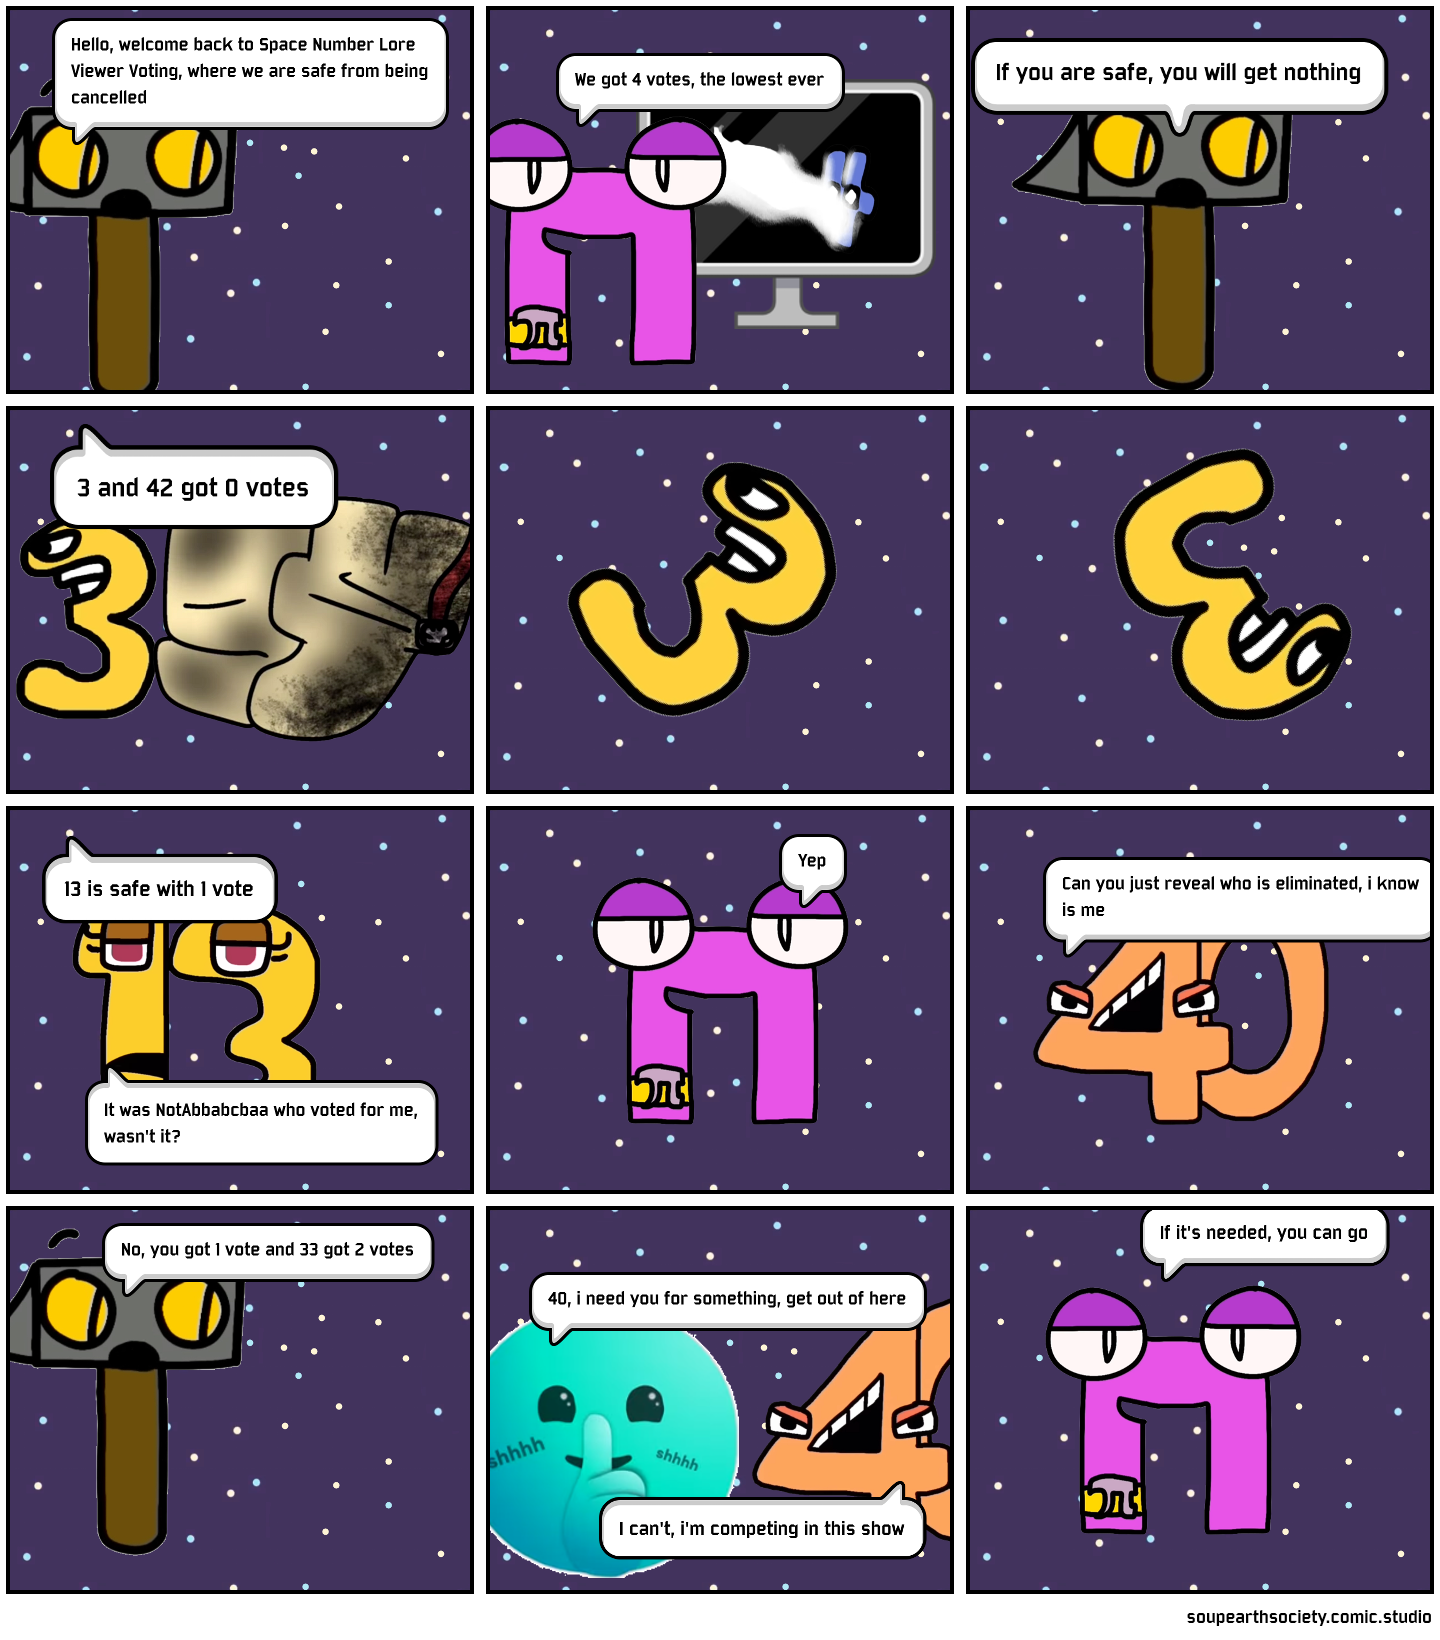 HKtito's Number Lore - 9 to -10 Part 2 (Final) - Comic Studio